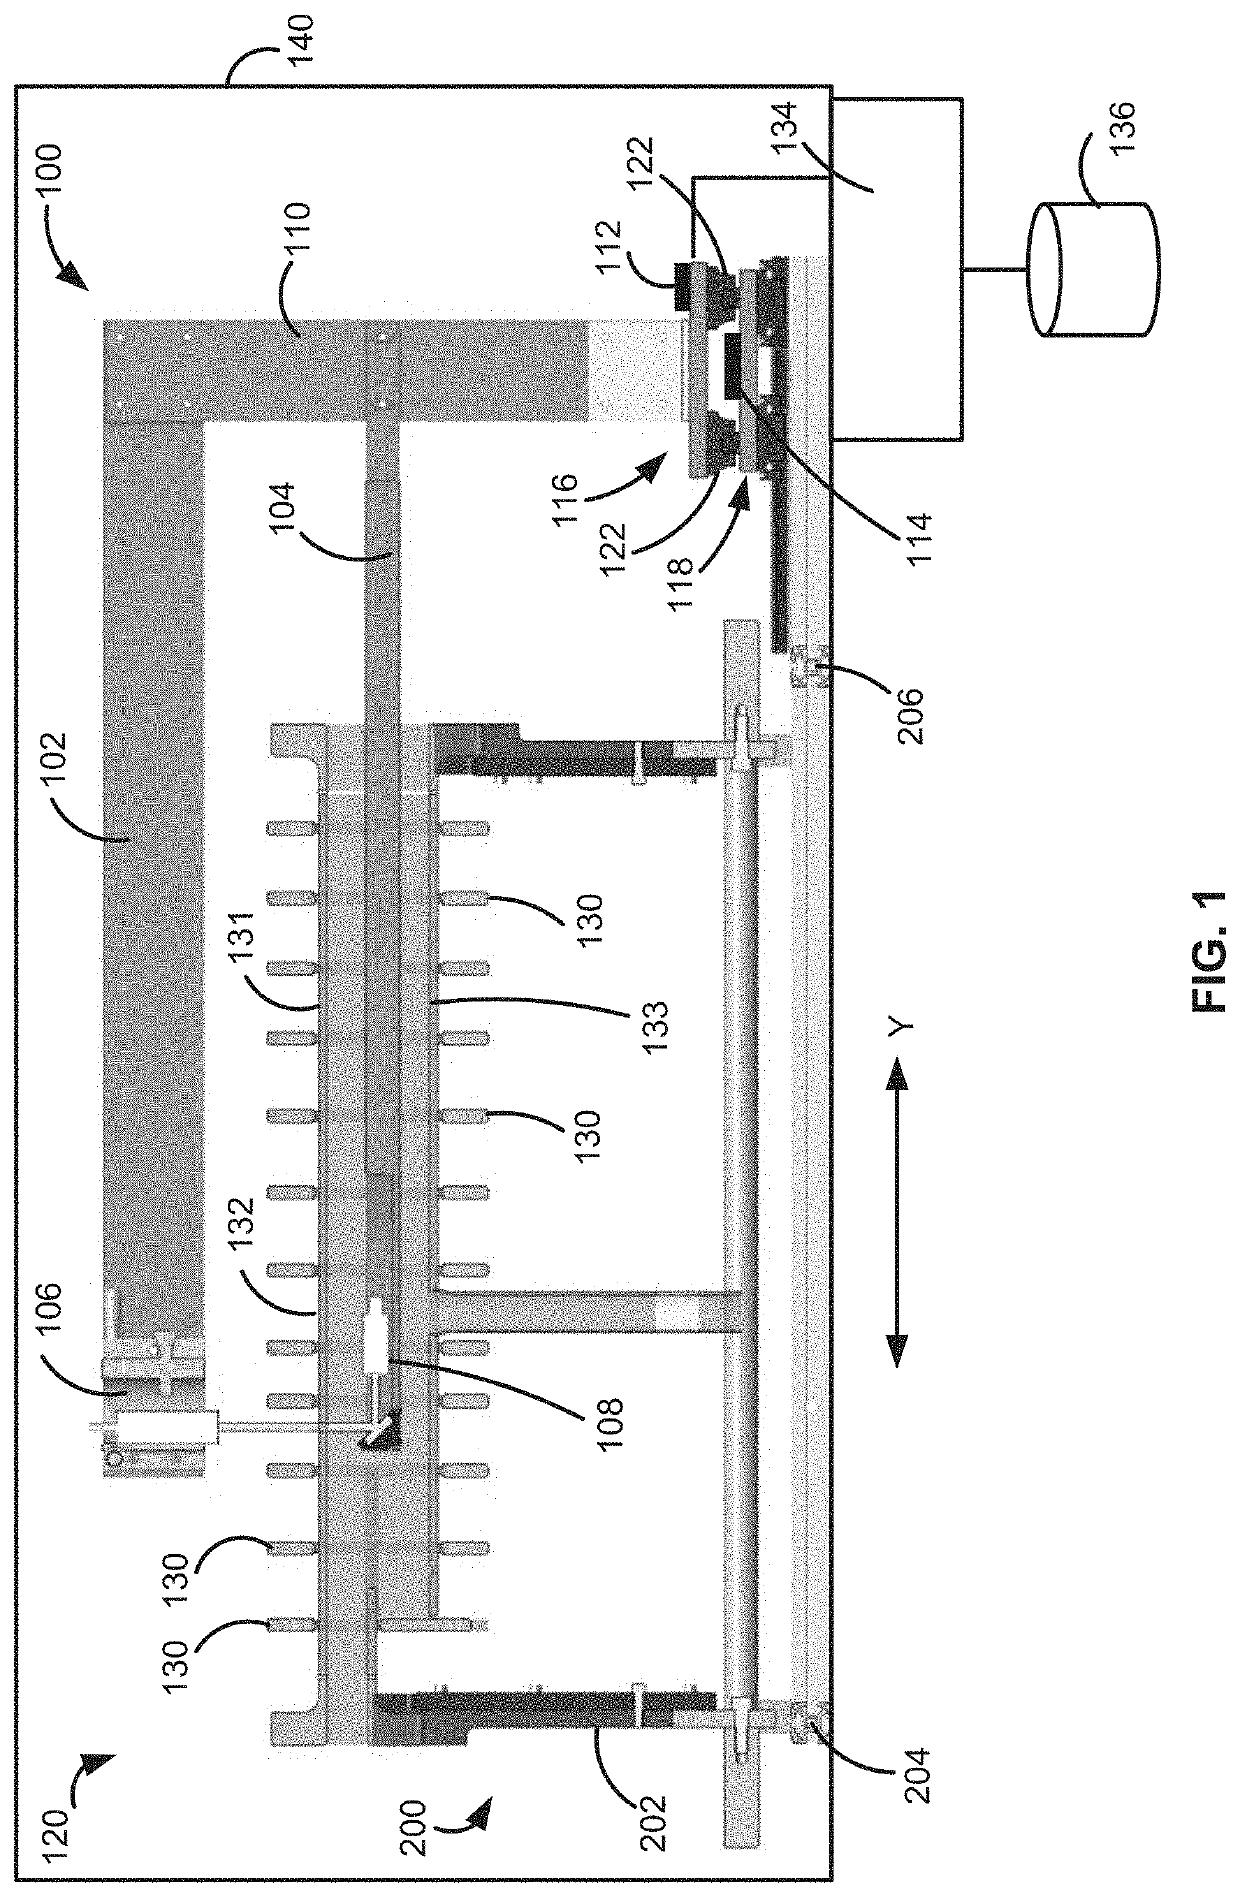 Method and apparatus for transmittance measurements of large articles